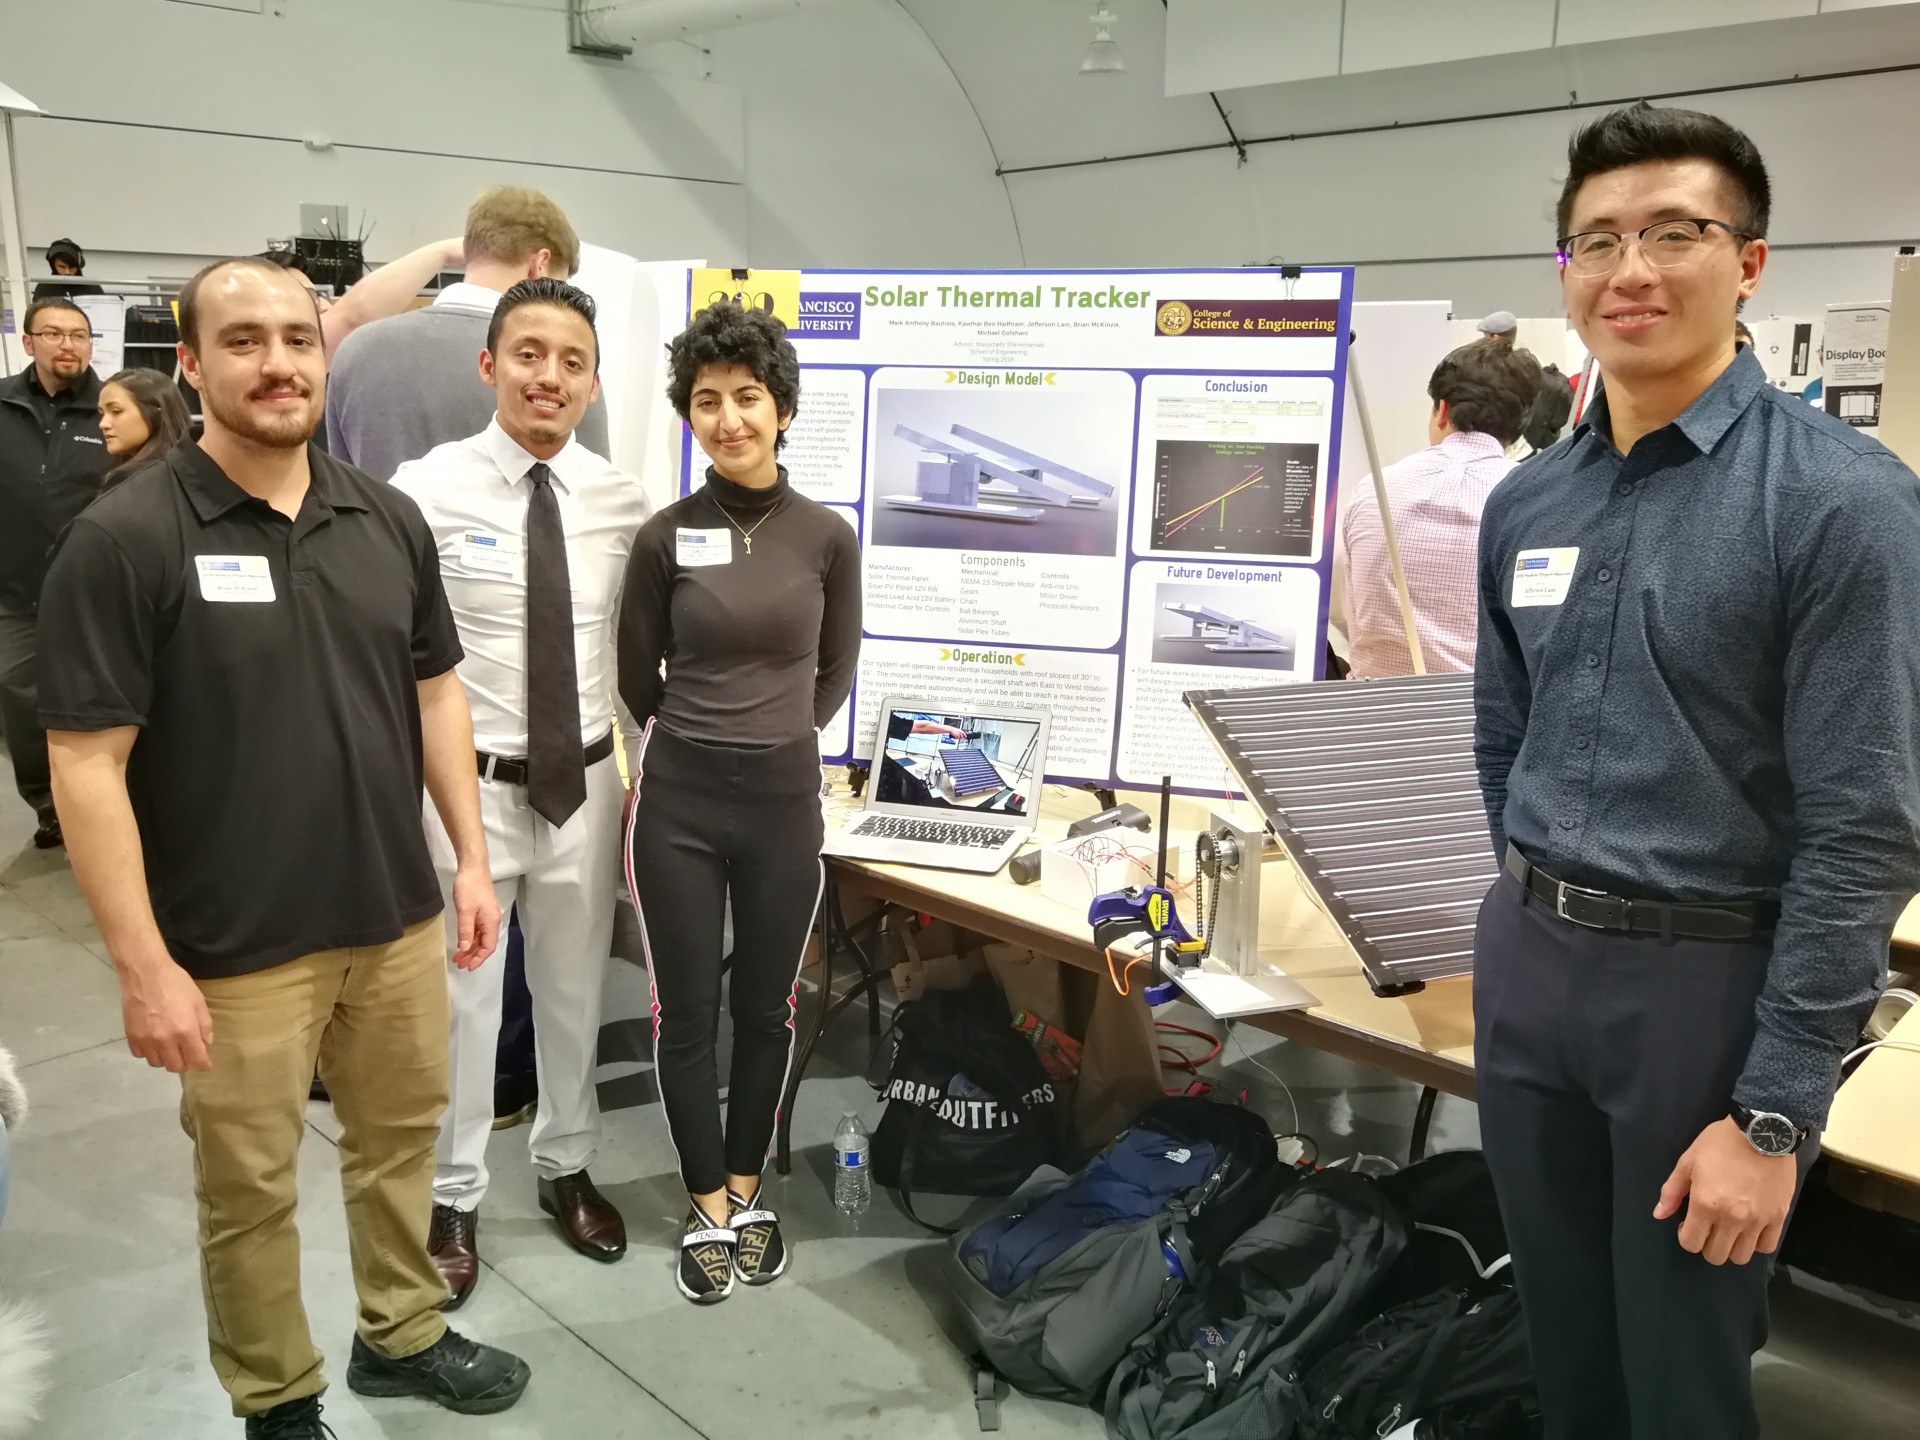 engineering students in front of a science fair display